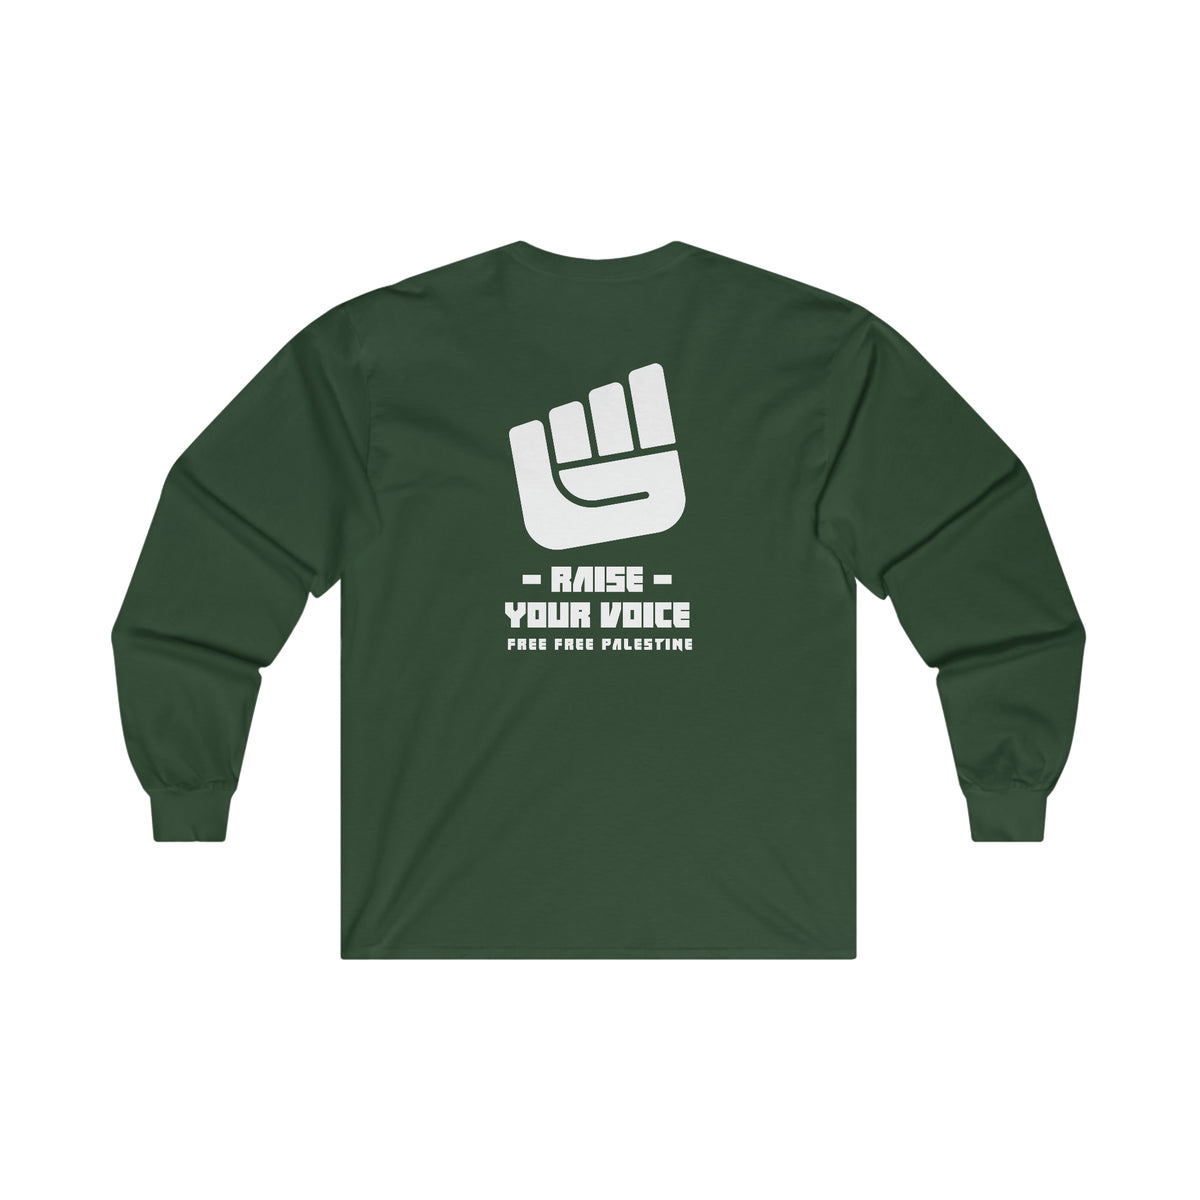 Free Free Palestine DGN WH Long Sleeve Tee